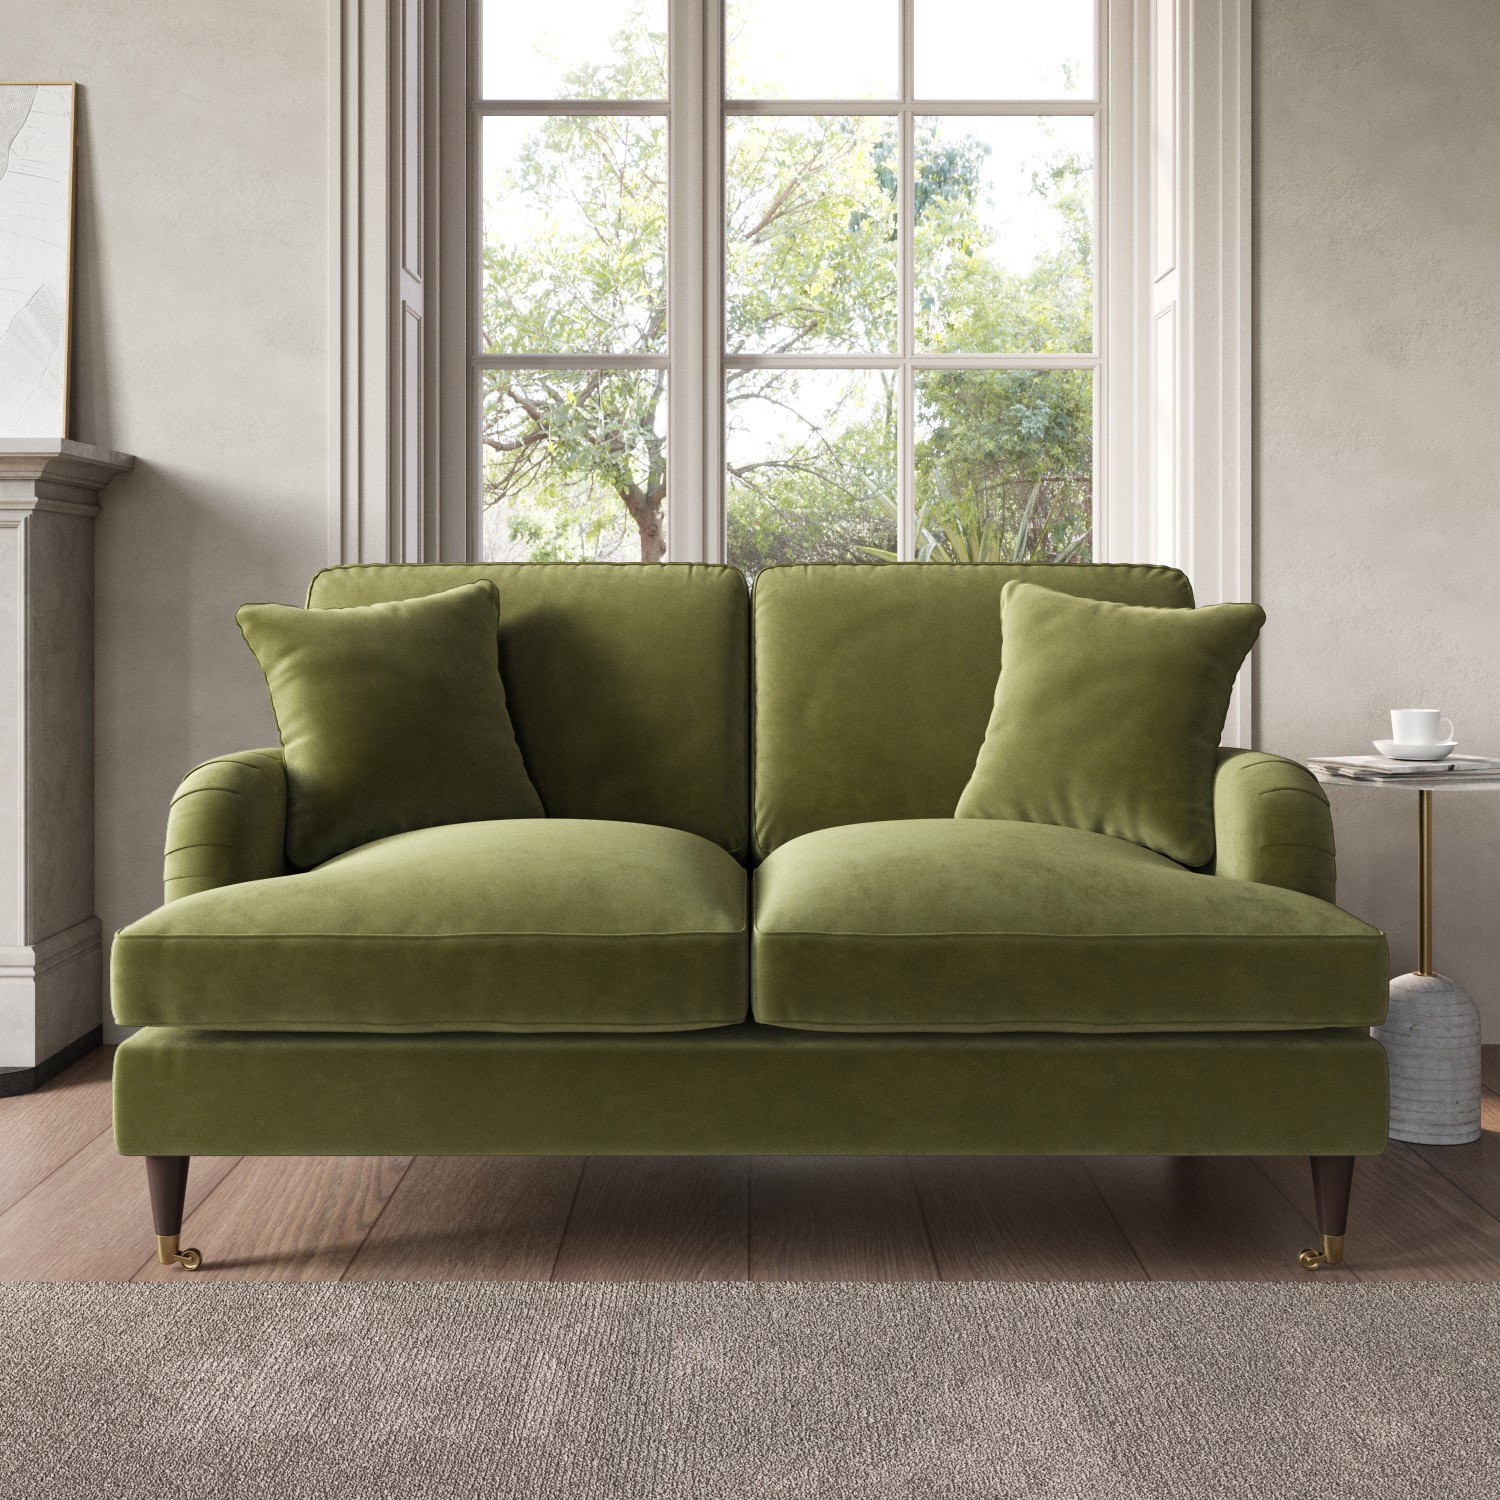 Read more about Olive green velvet 2 seater sofa payton